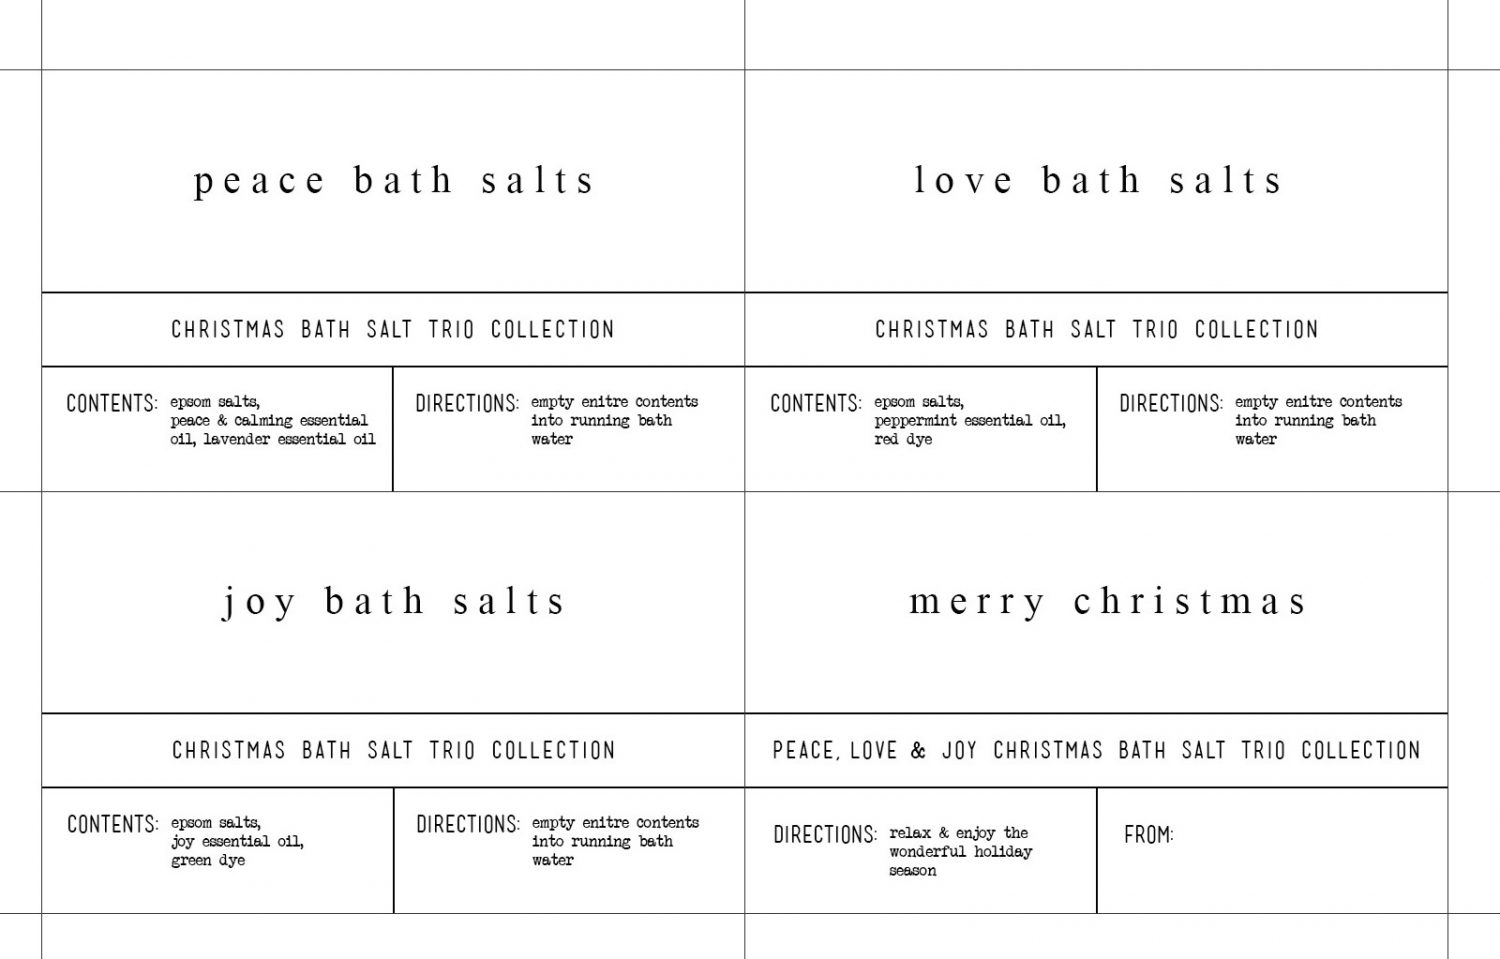 This Holiday Bath Salt Trio Collection is easy and quick to make. It's the perfect gift for girlfriends, neighbors, teachers and more!